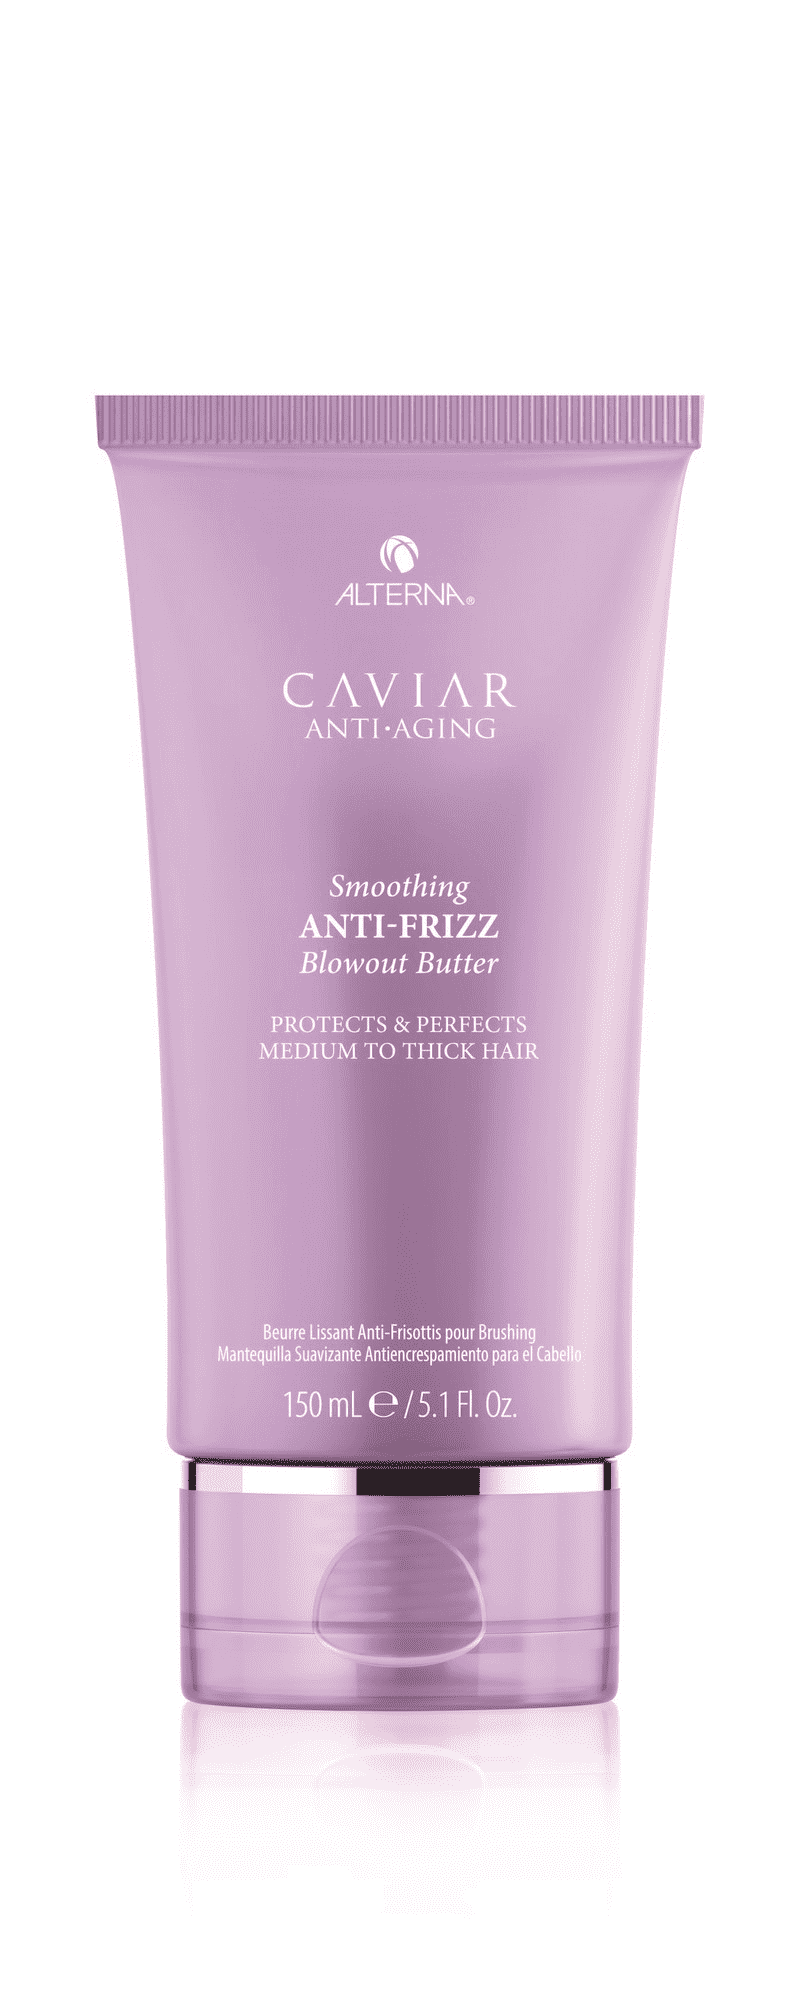 Alterna - Caviar Anti-Aging Smoothing Anti-Frizz Blowout Butter